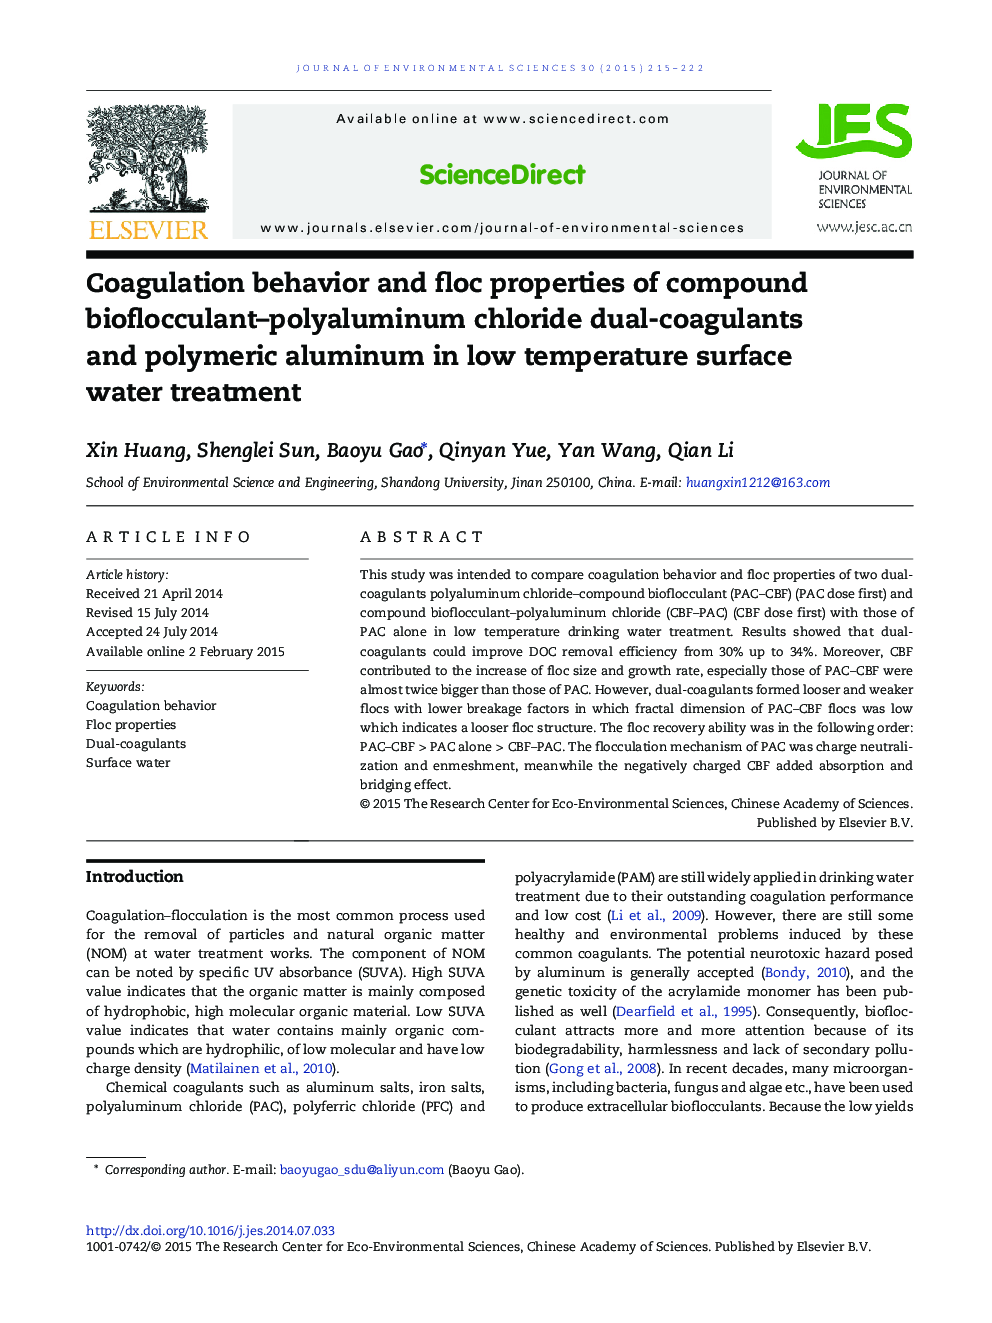 Coagulation behavior and floc properties of compound bioflocculant–polyaluminum chloride dual-coagulants and polymeric aluminum in low temperature surface water treatment